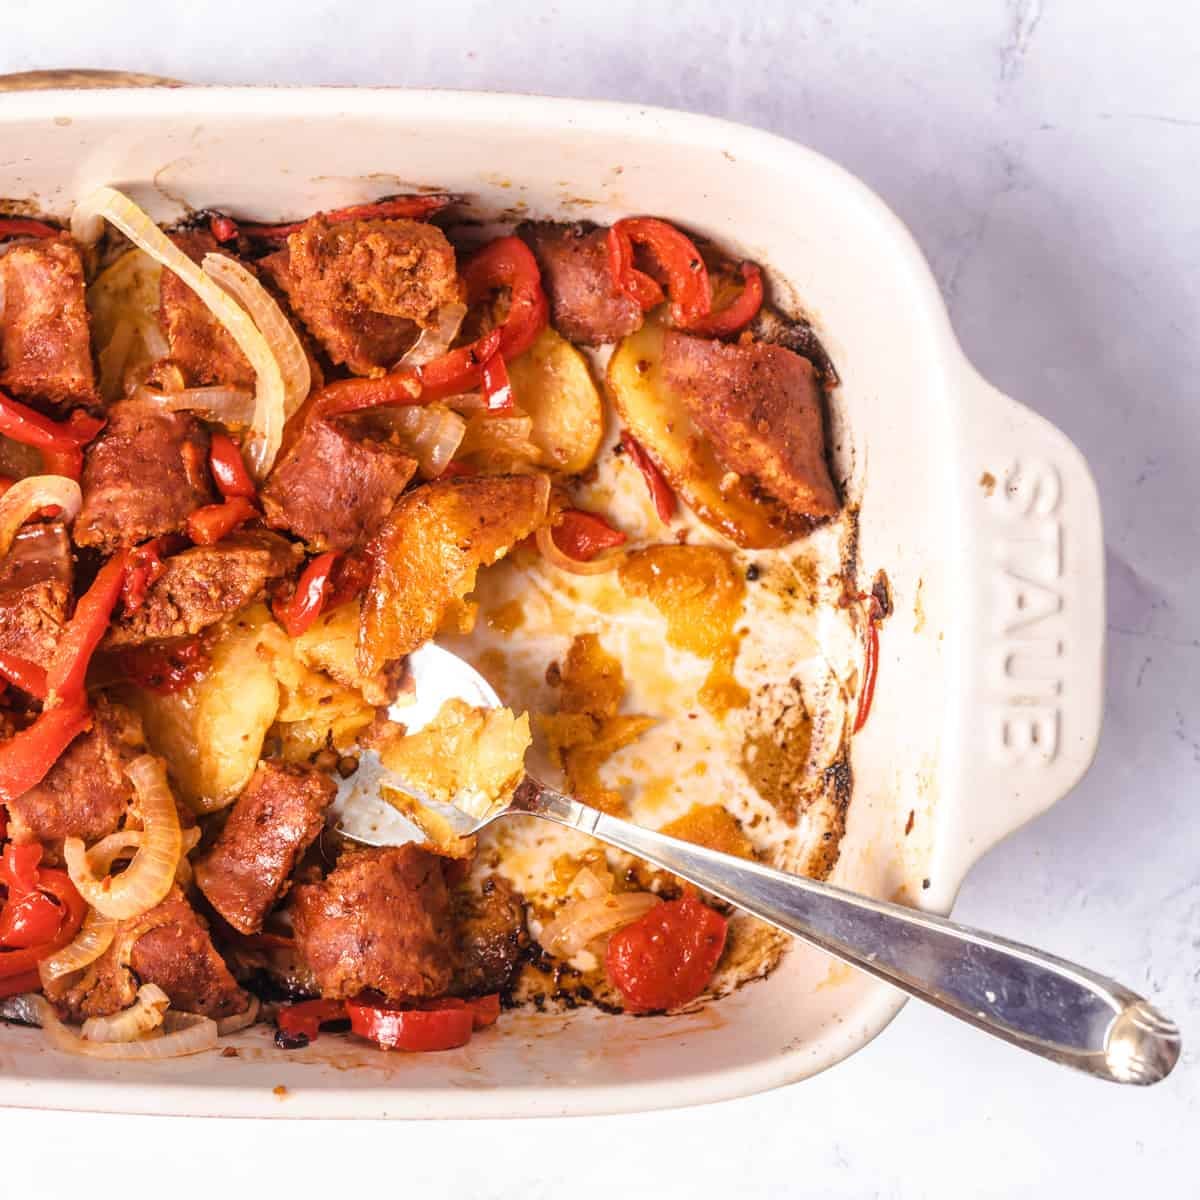 Potatoes and sausage casserole in baking dish with serving spoon.